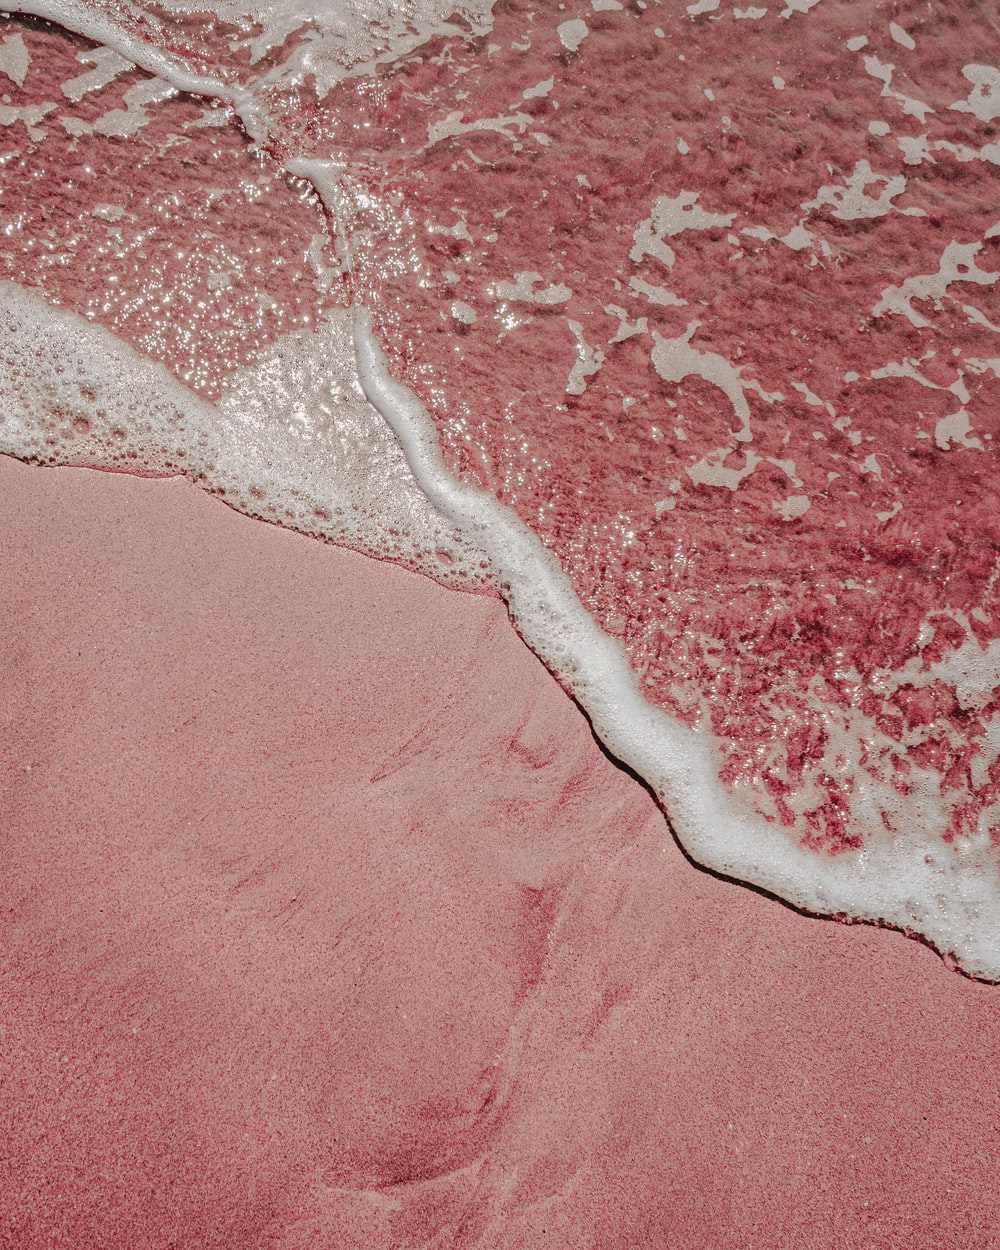 Pink Sand Picture. Download Free Image